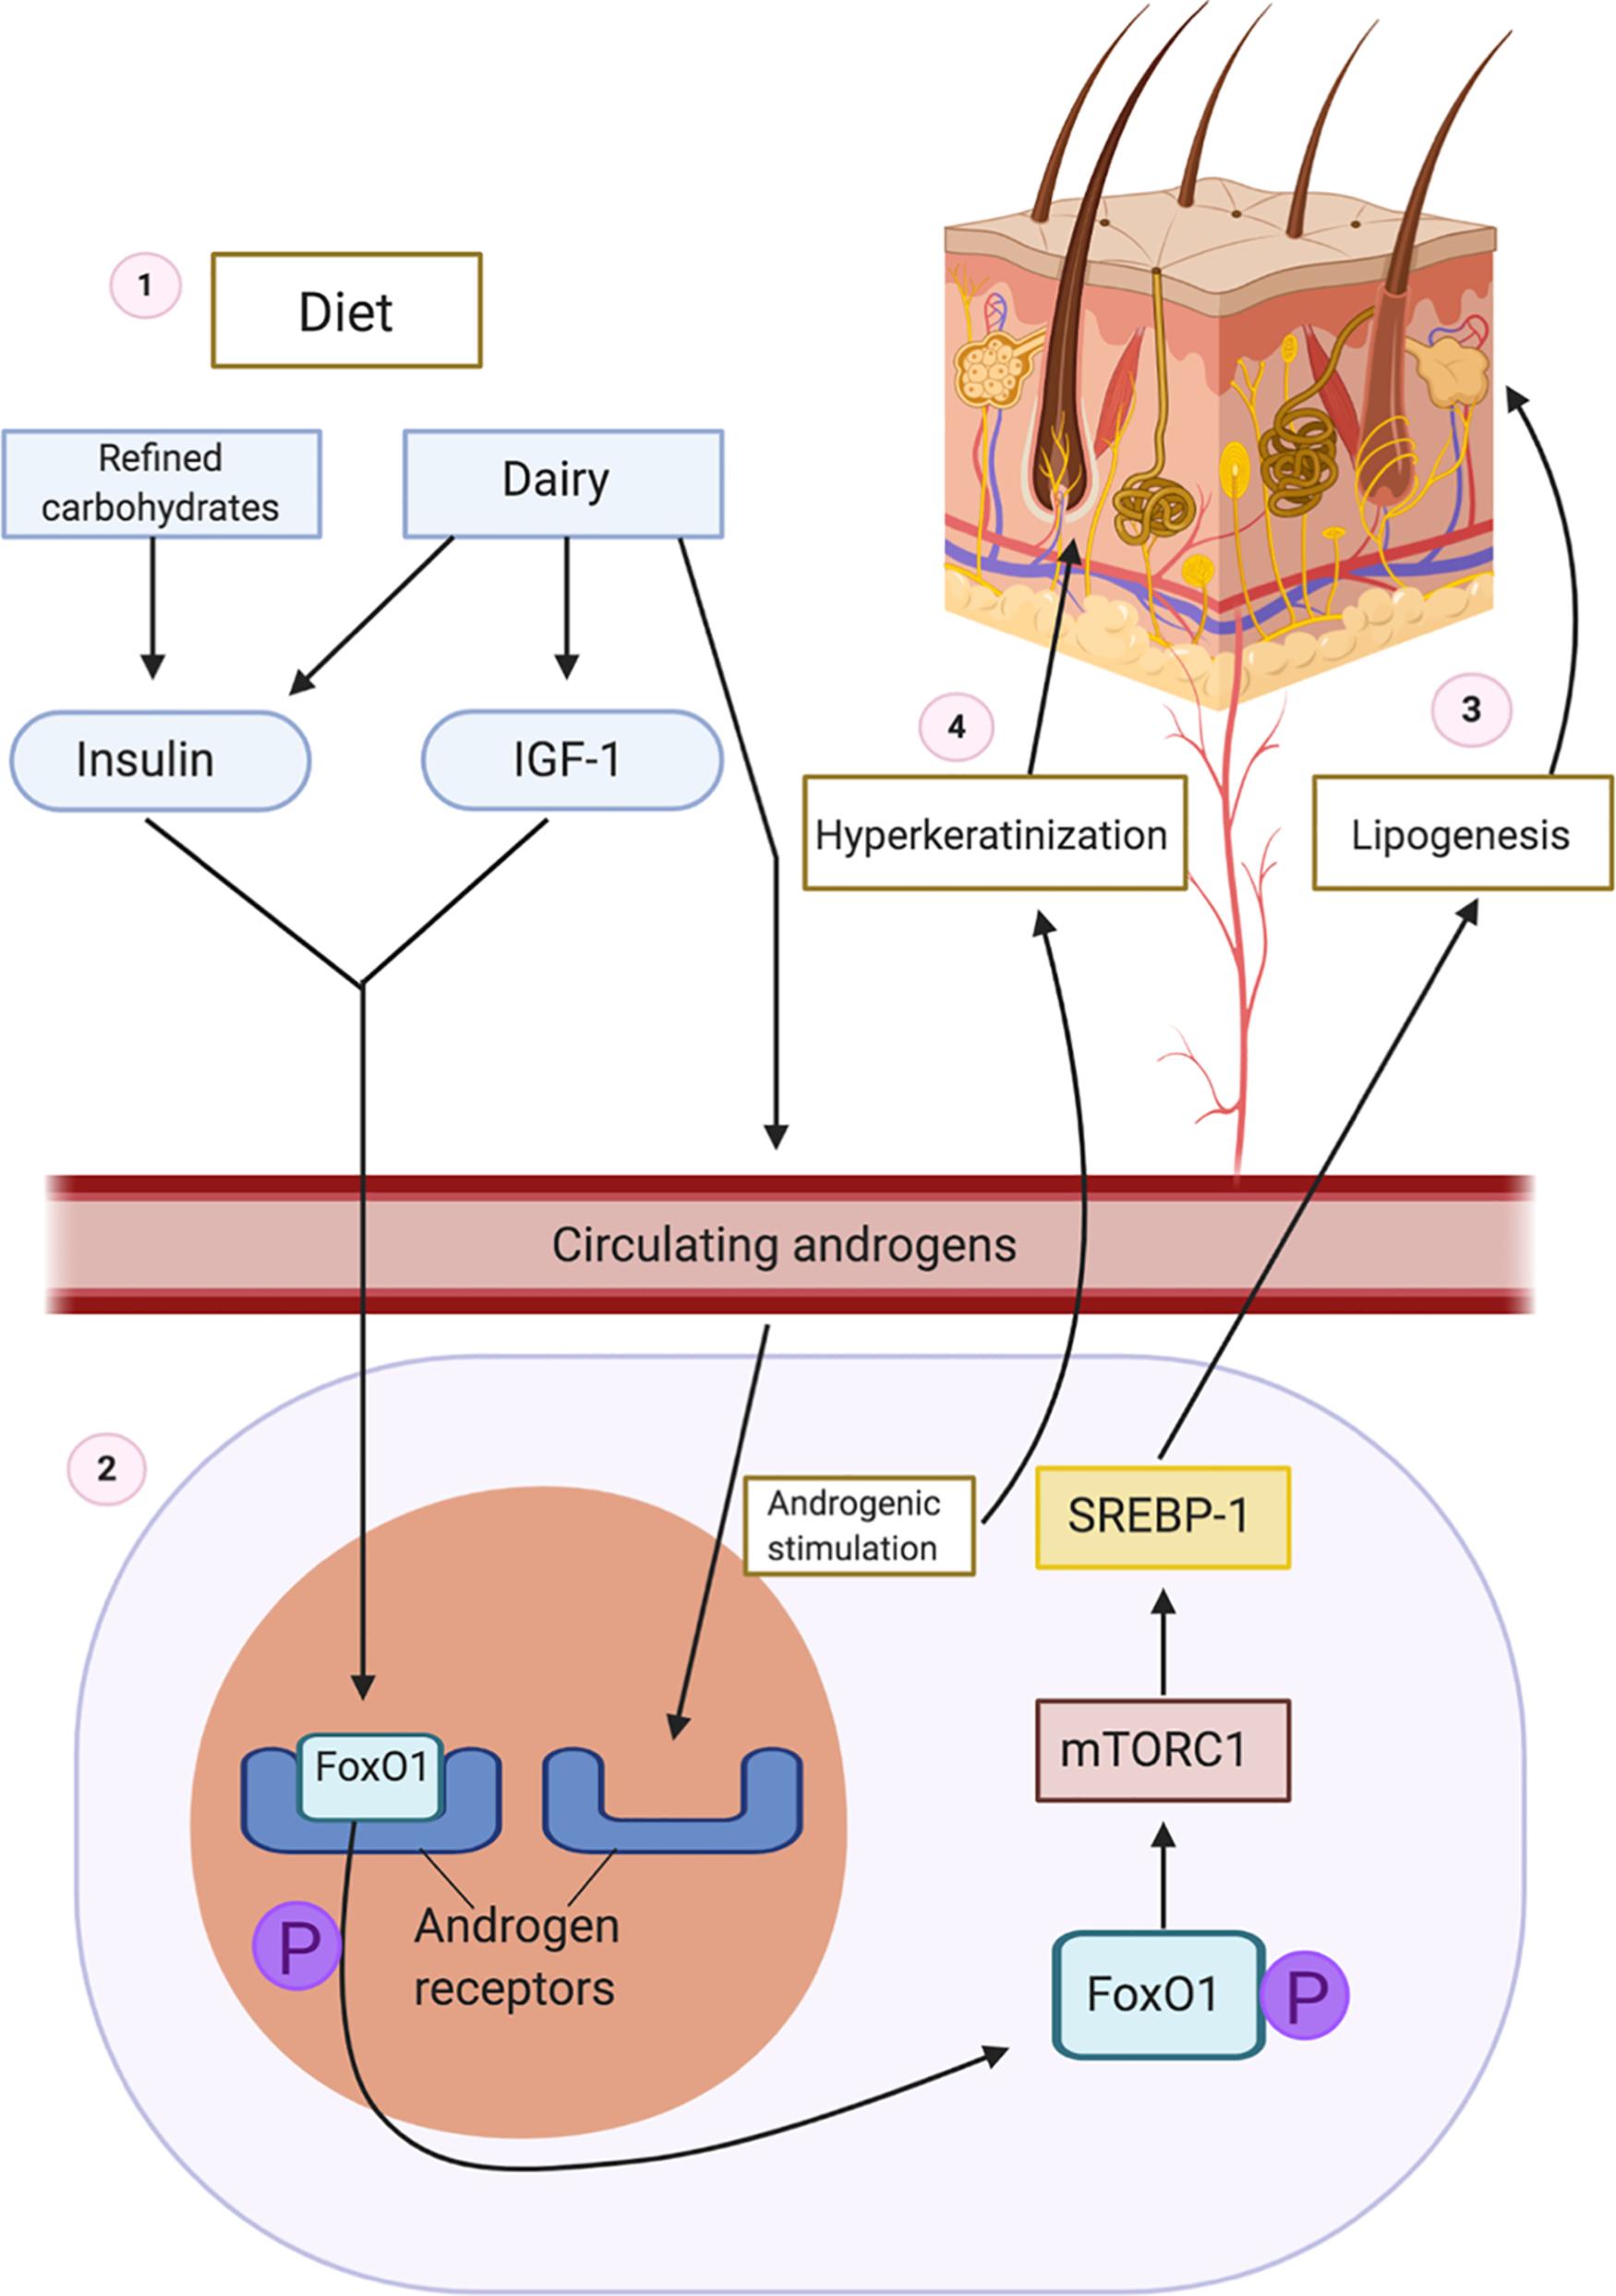 Fig. 27.1, Hypothesized Mechanism of Dietary Exacerbation of Hidradenitis Suppurativa. 1. Ingestion of carbohydrates increases insulin. Dairy increases insulin, IGF-1, and circulating androgens. 2. FoxO1 is normally bound to the androgen receptor to suppress androgenic signaling. Increased insulin and IGF-1 levels lead to phosphorylation of nuclear FoxO1, which causes subsequent expulsion of FoxO1 from the nucleus to the cytoplasm. 3. In the cytoplasm, FoxO1 stimulates mTORC, which acts on STEBP to increase lipogenesis. 4. Circulating endogenous and exogenous androgens bind to androgen receptors, leading to hyperkeratinization of the hair follicle which eventually ruptures.